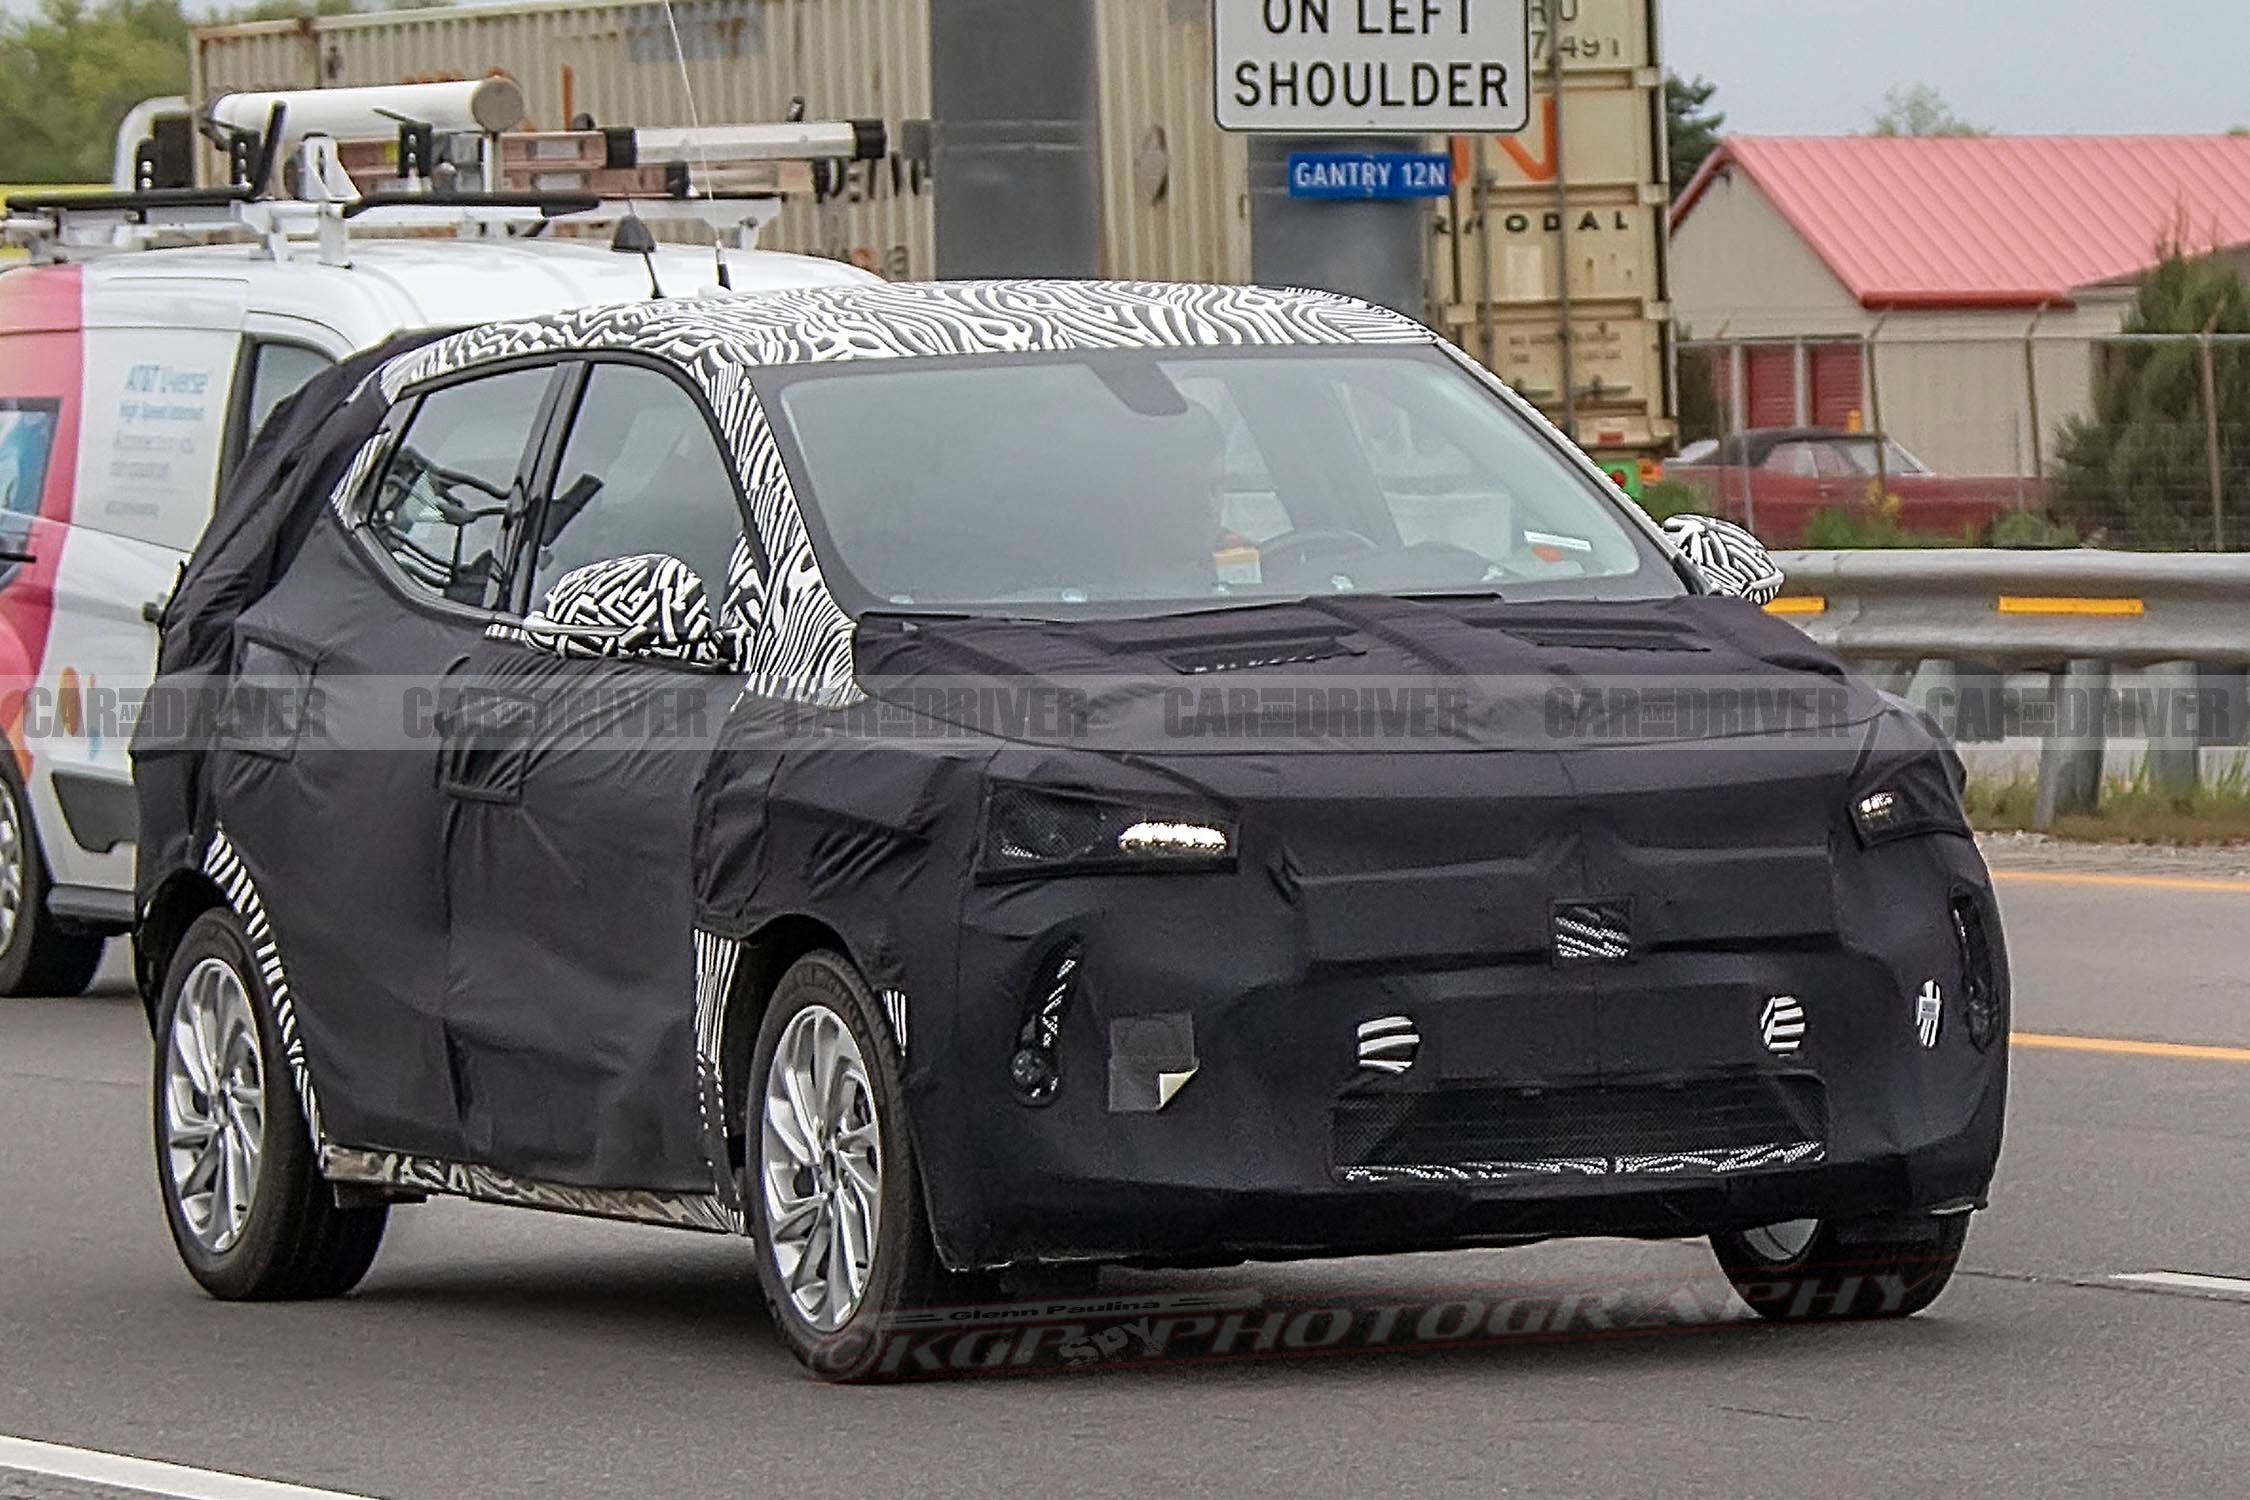 21 Chevrolet Bolt Euv Electric Crossover Spied